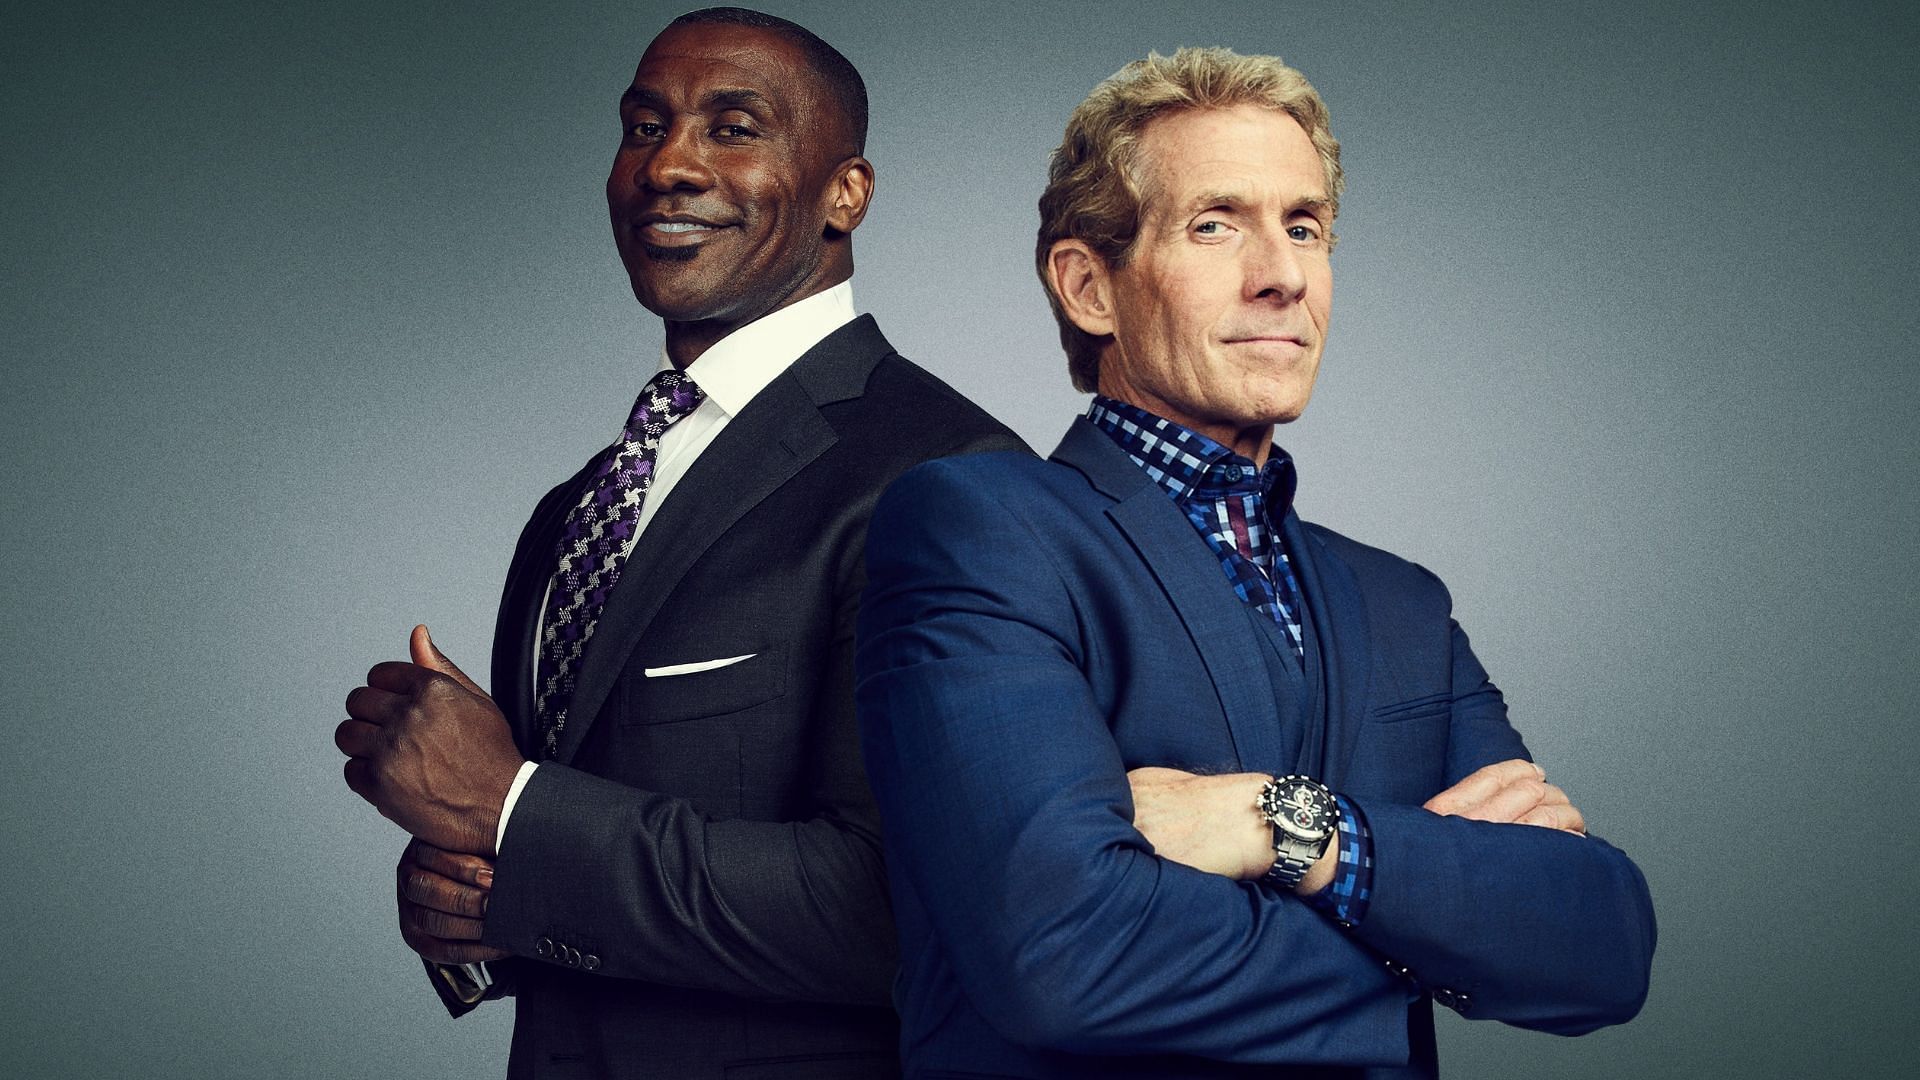 Skip Bayless and Shannon Sharpe were the hosts of Fox Sports 1